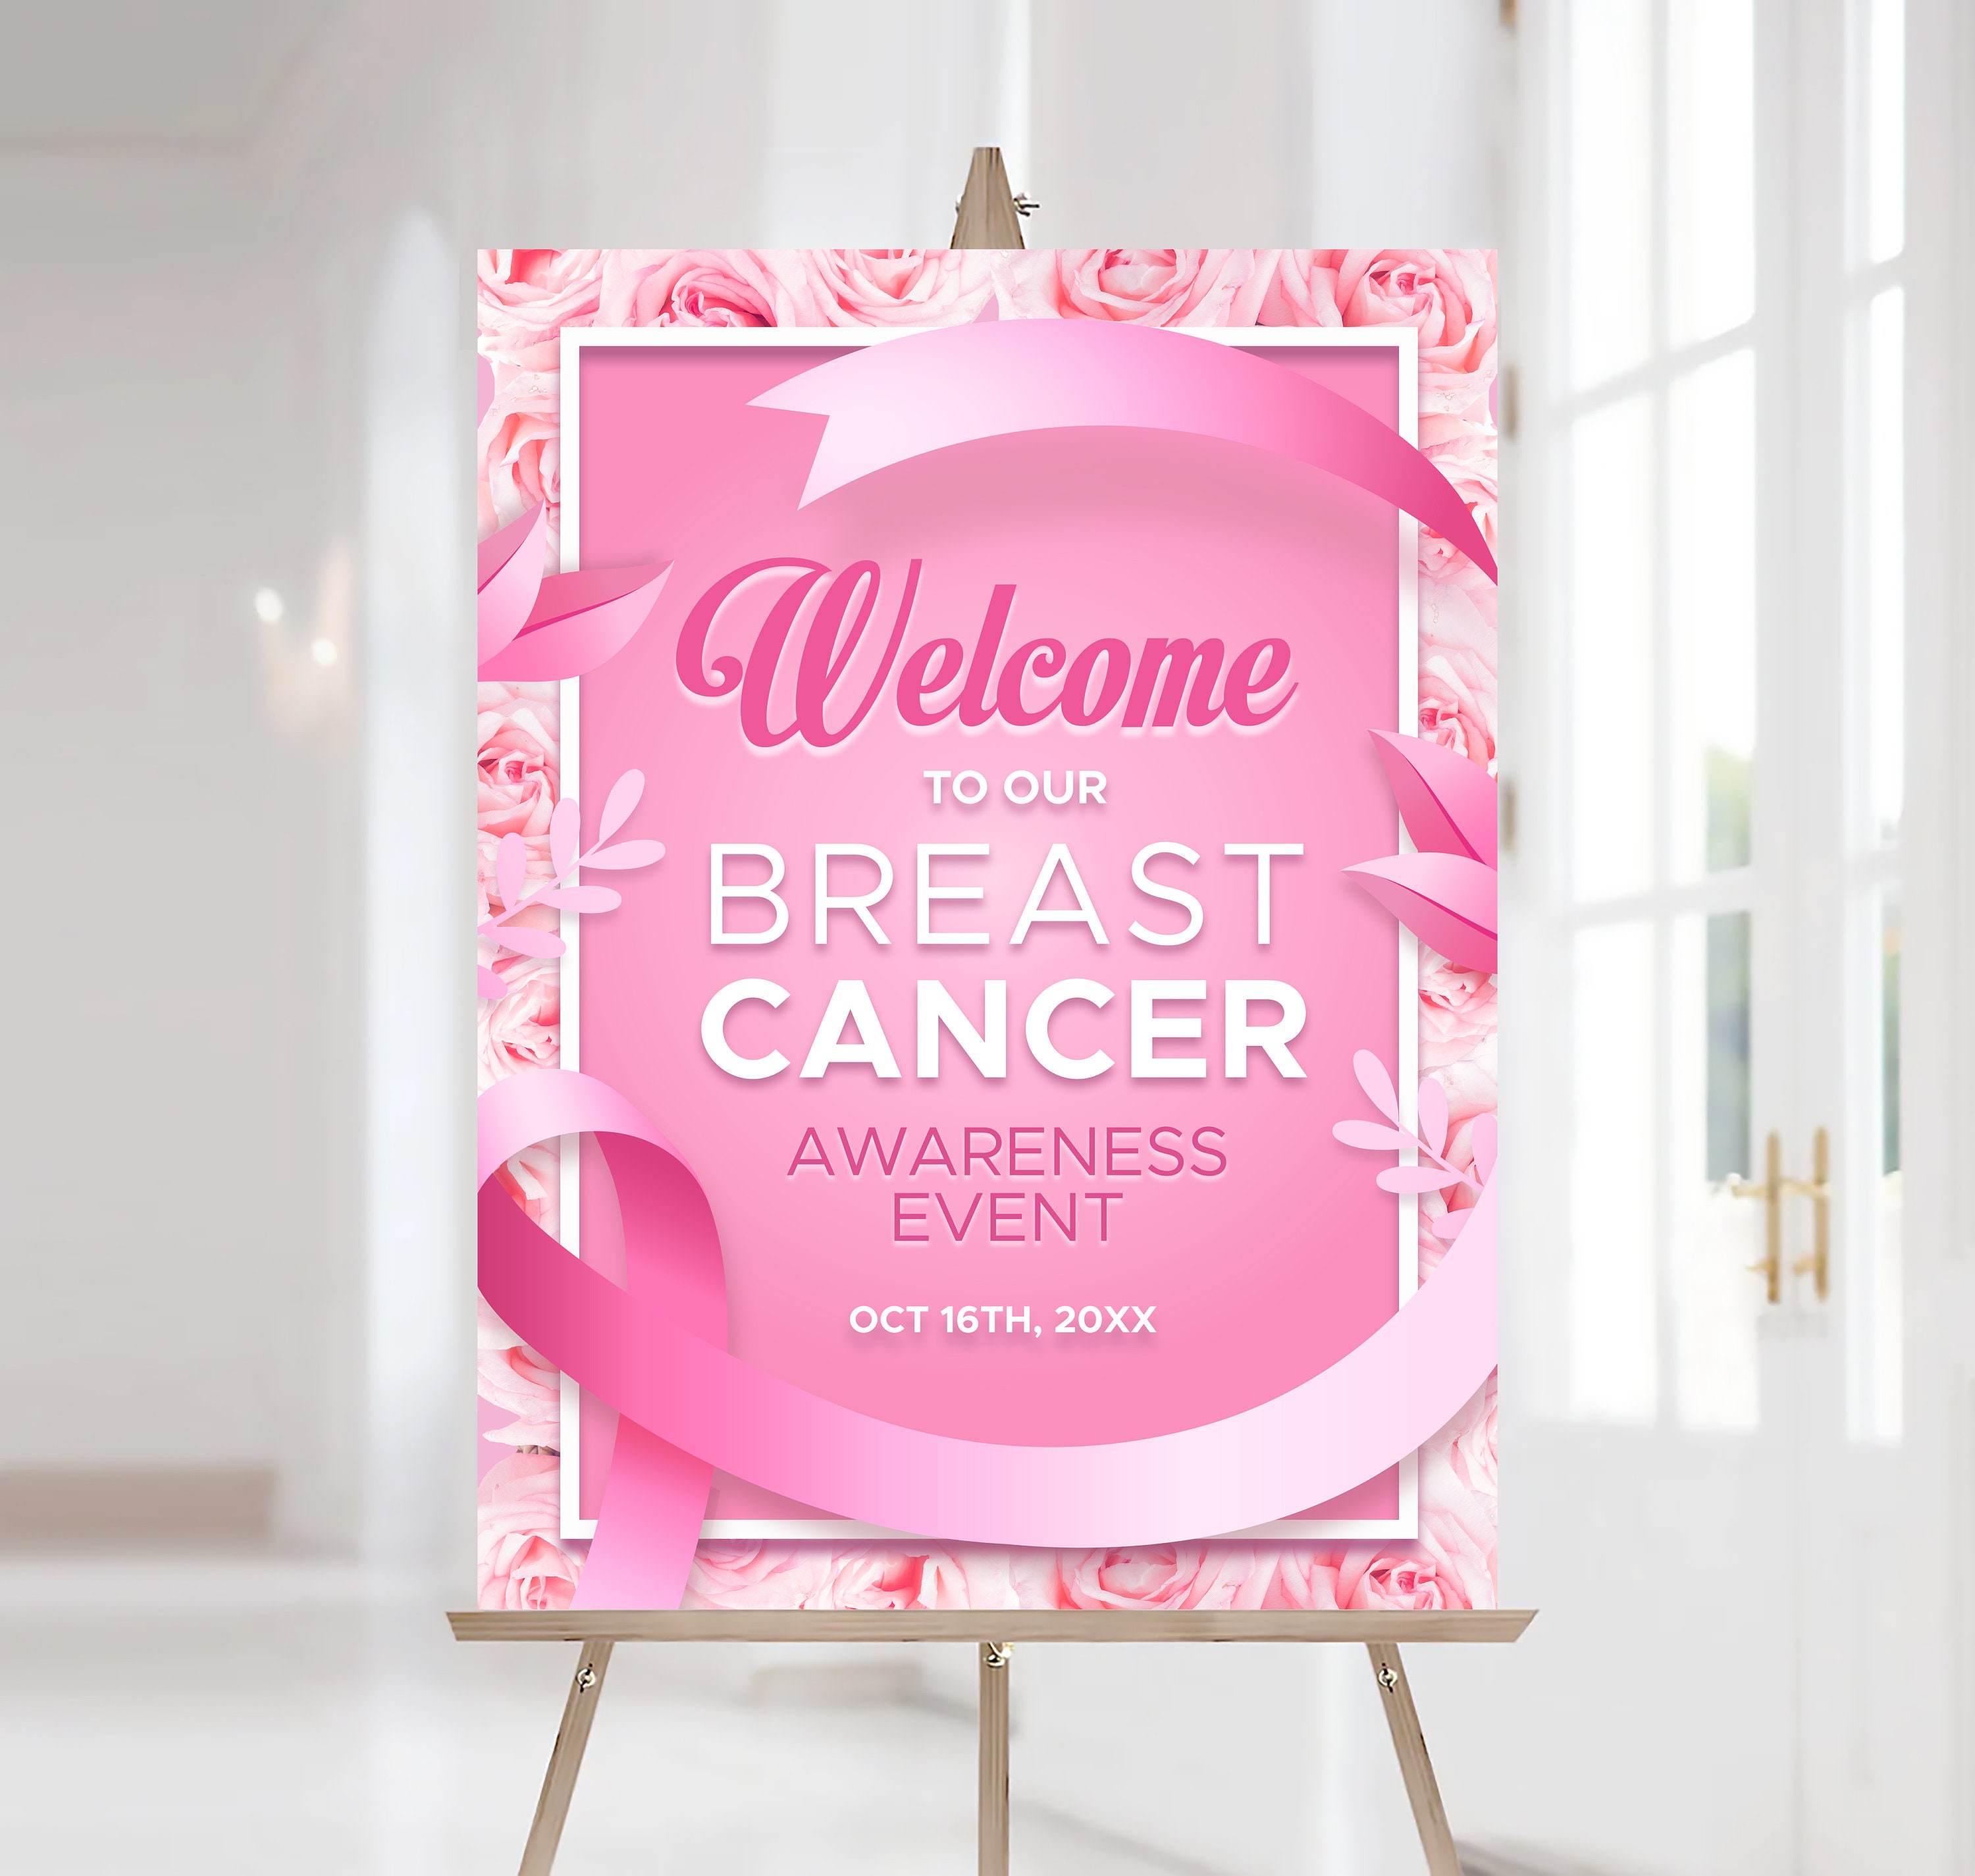 EDITABLE Breast Cancer Fundraiser Welcome Sign Cancer -  Portugal